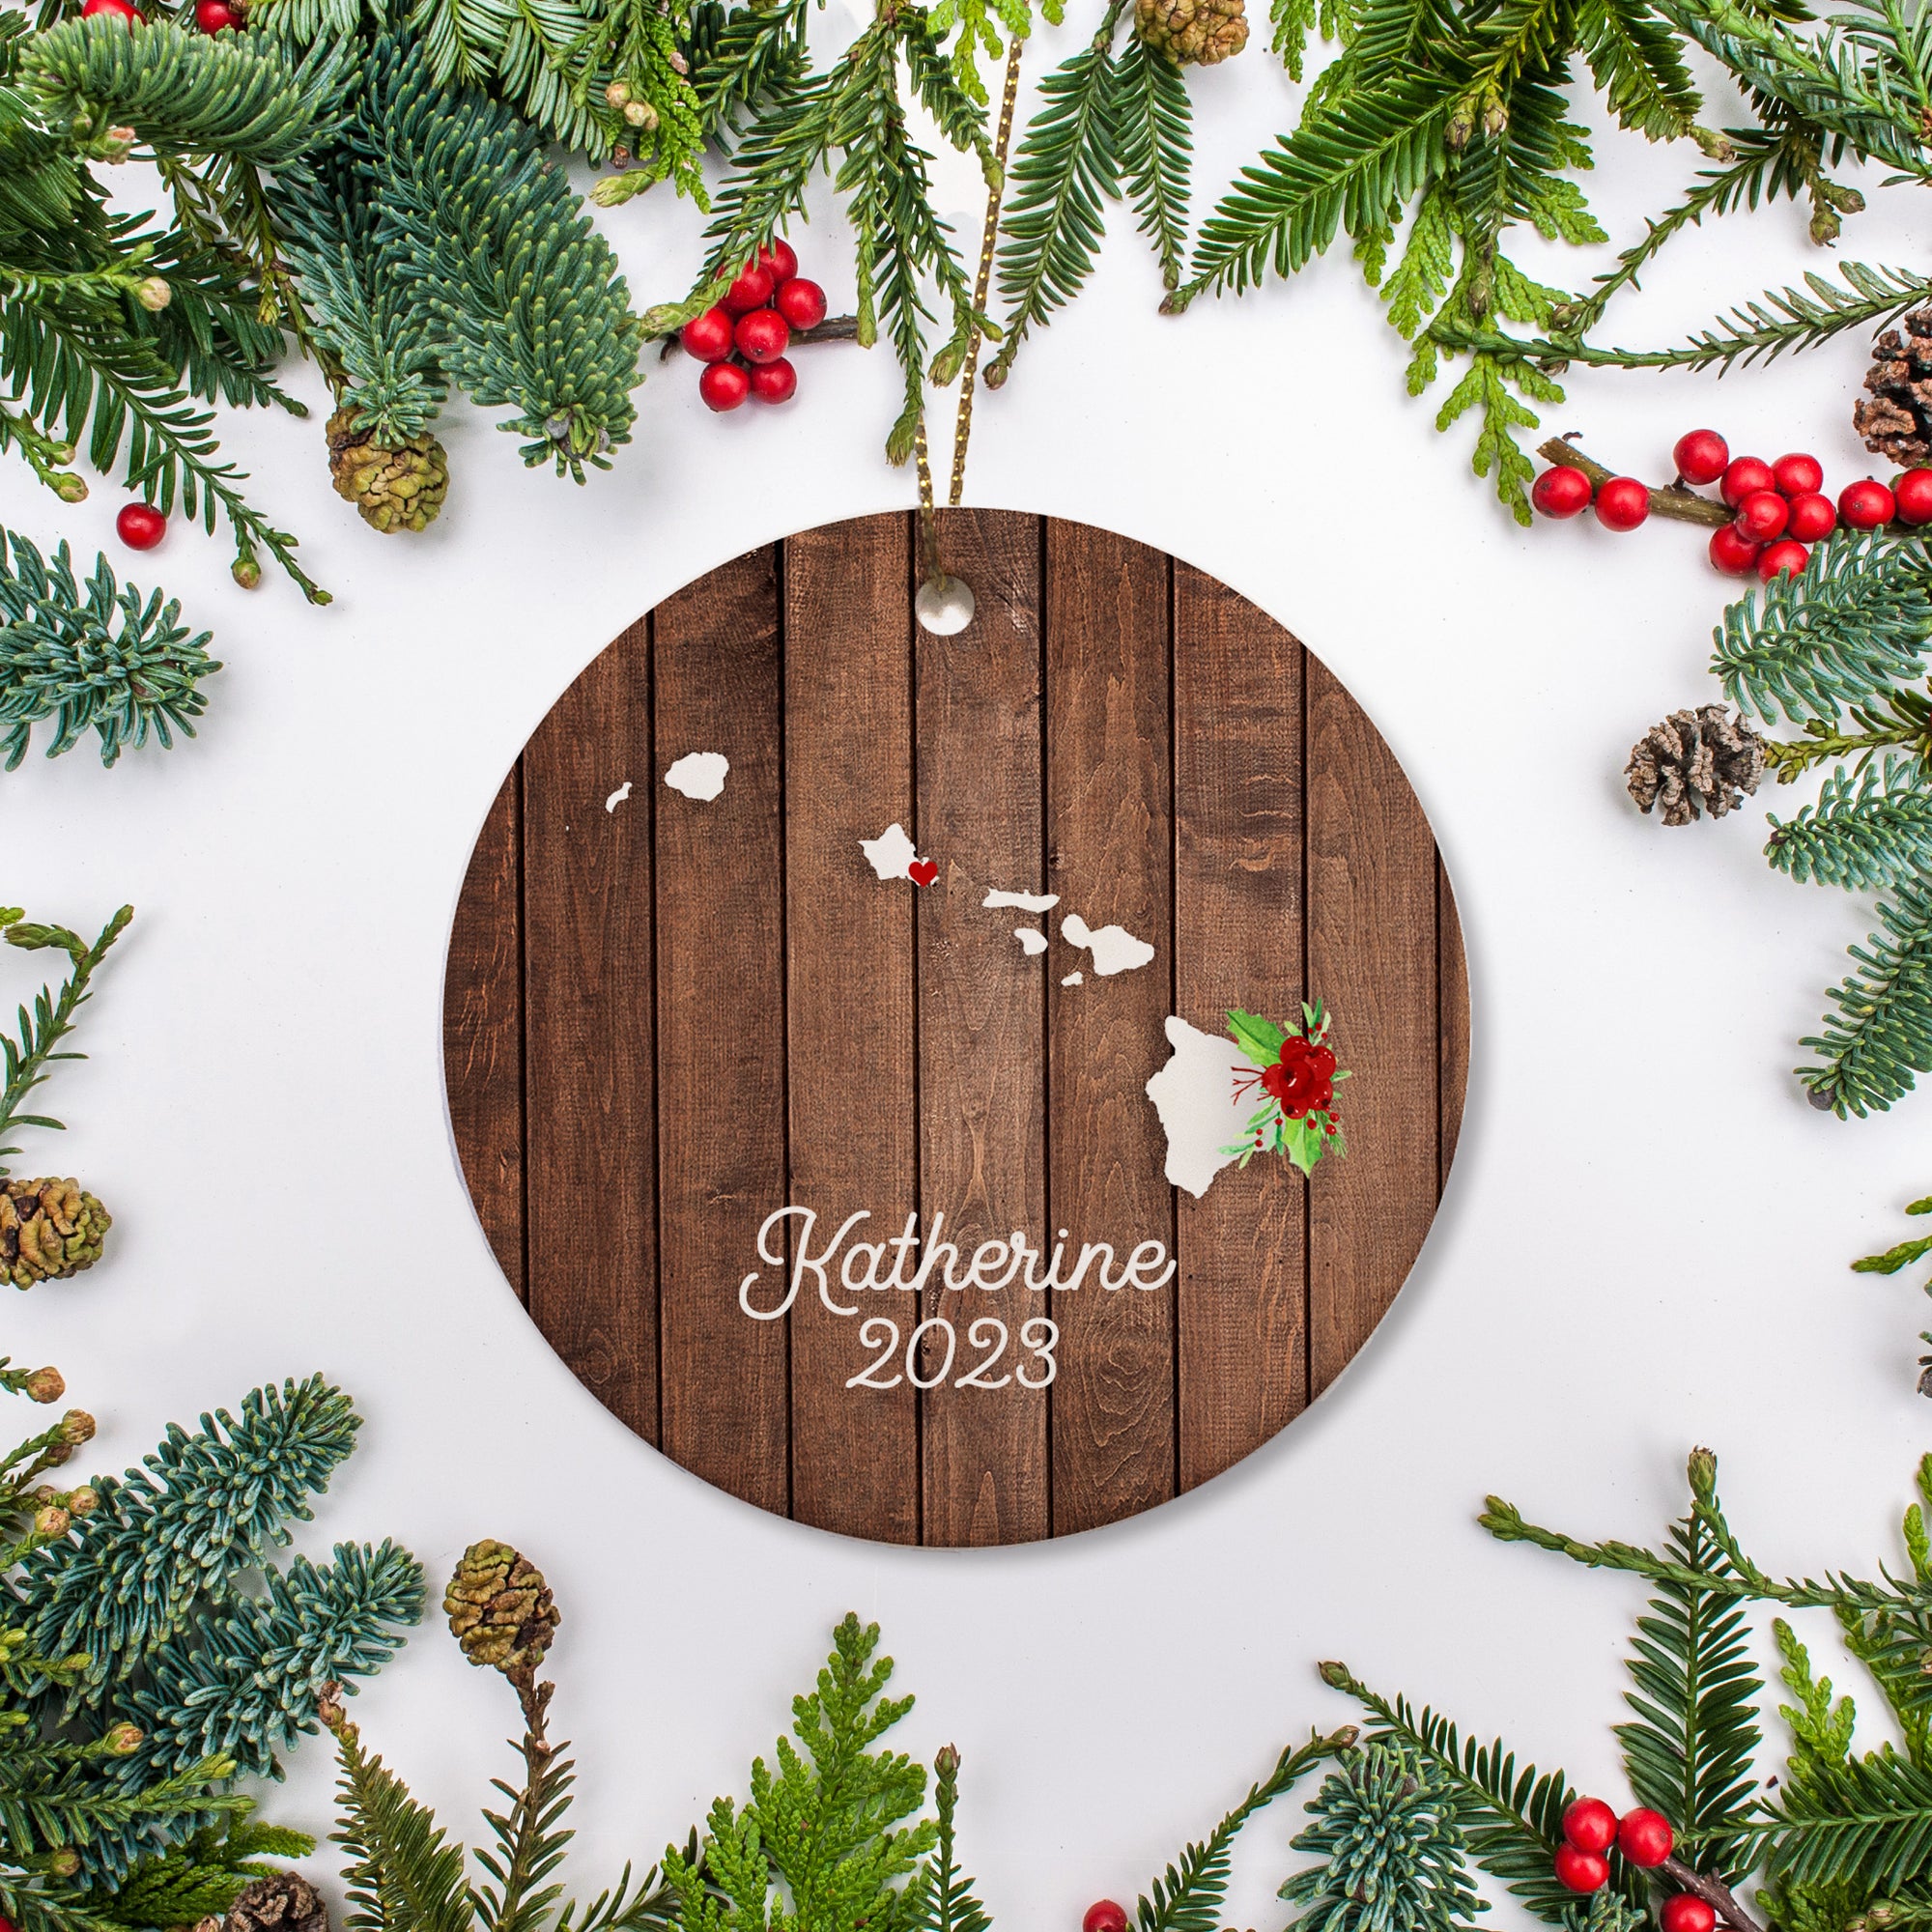 Hawaii state christmas ornament. Personalized with your name, city, and year. Ceramic keepsake ornament with a gold hanging string. Great for a college student, new home owners, just moved, or vacation memory